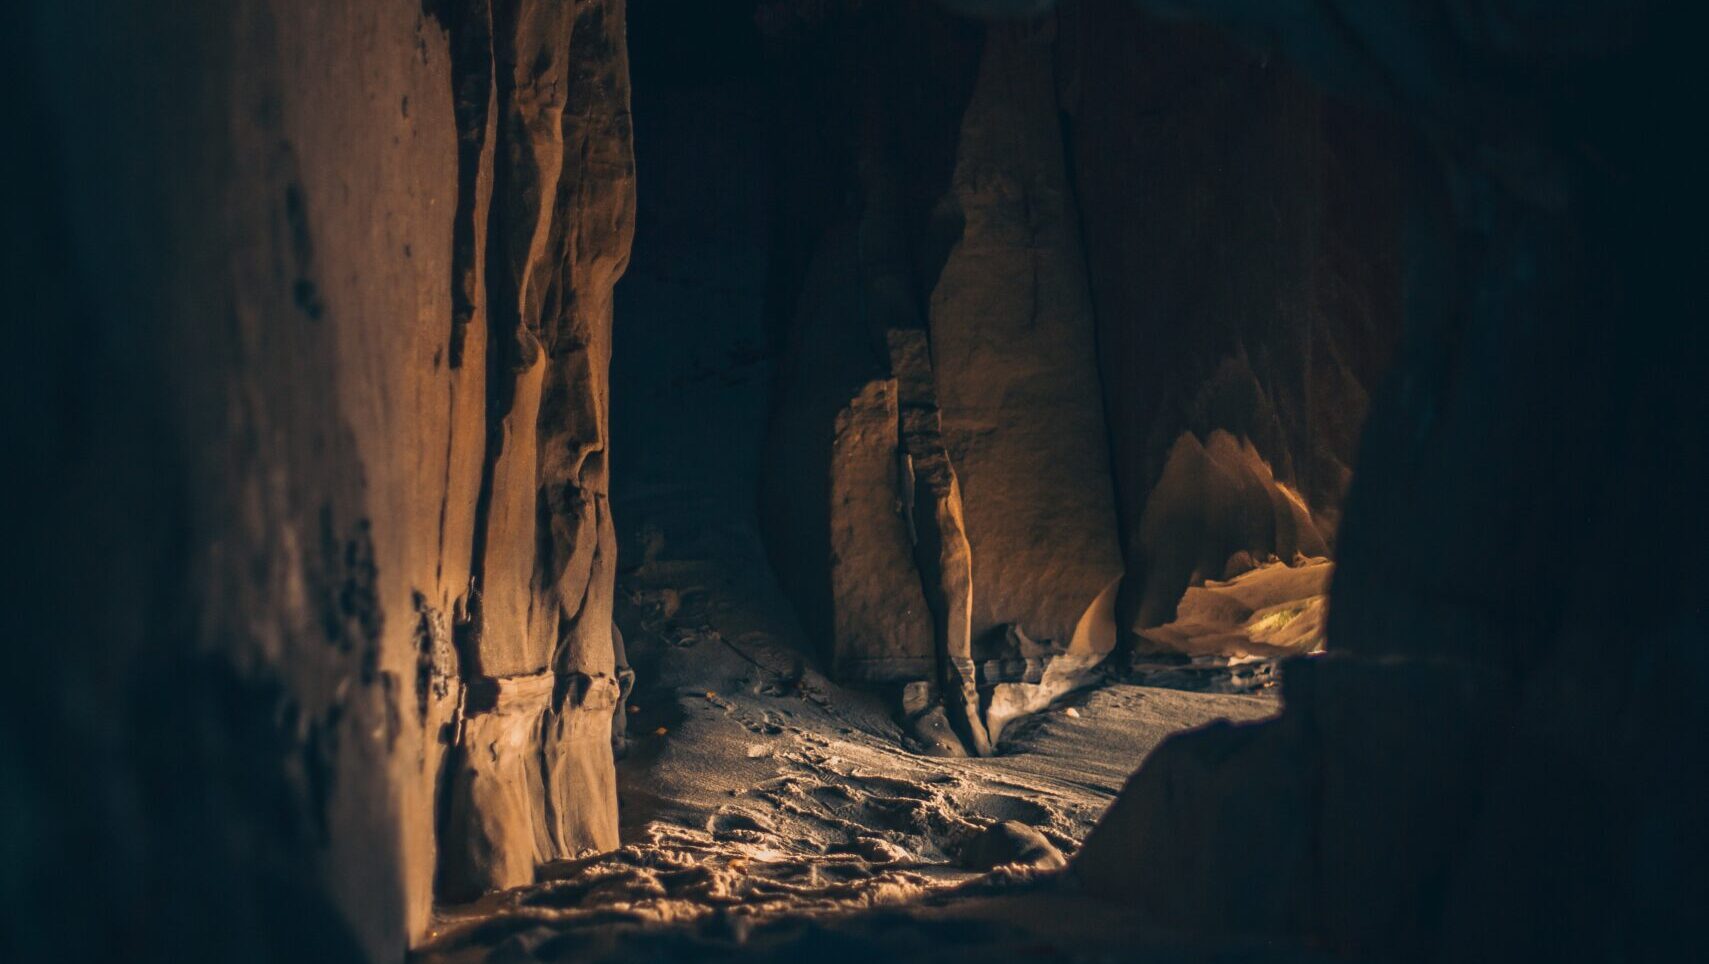 Image of the inside of a cave, sand on the ground.